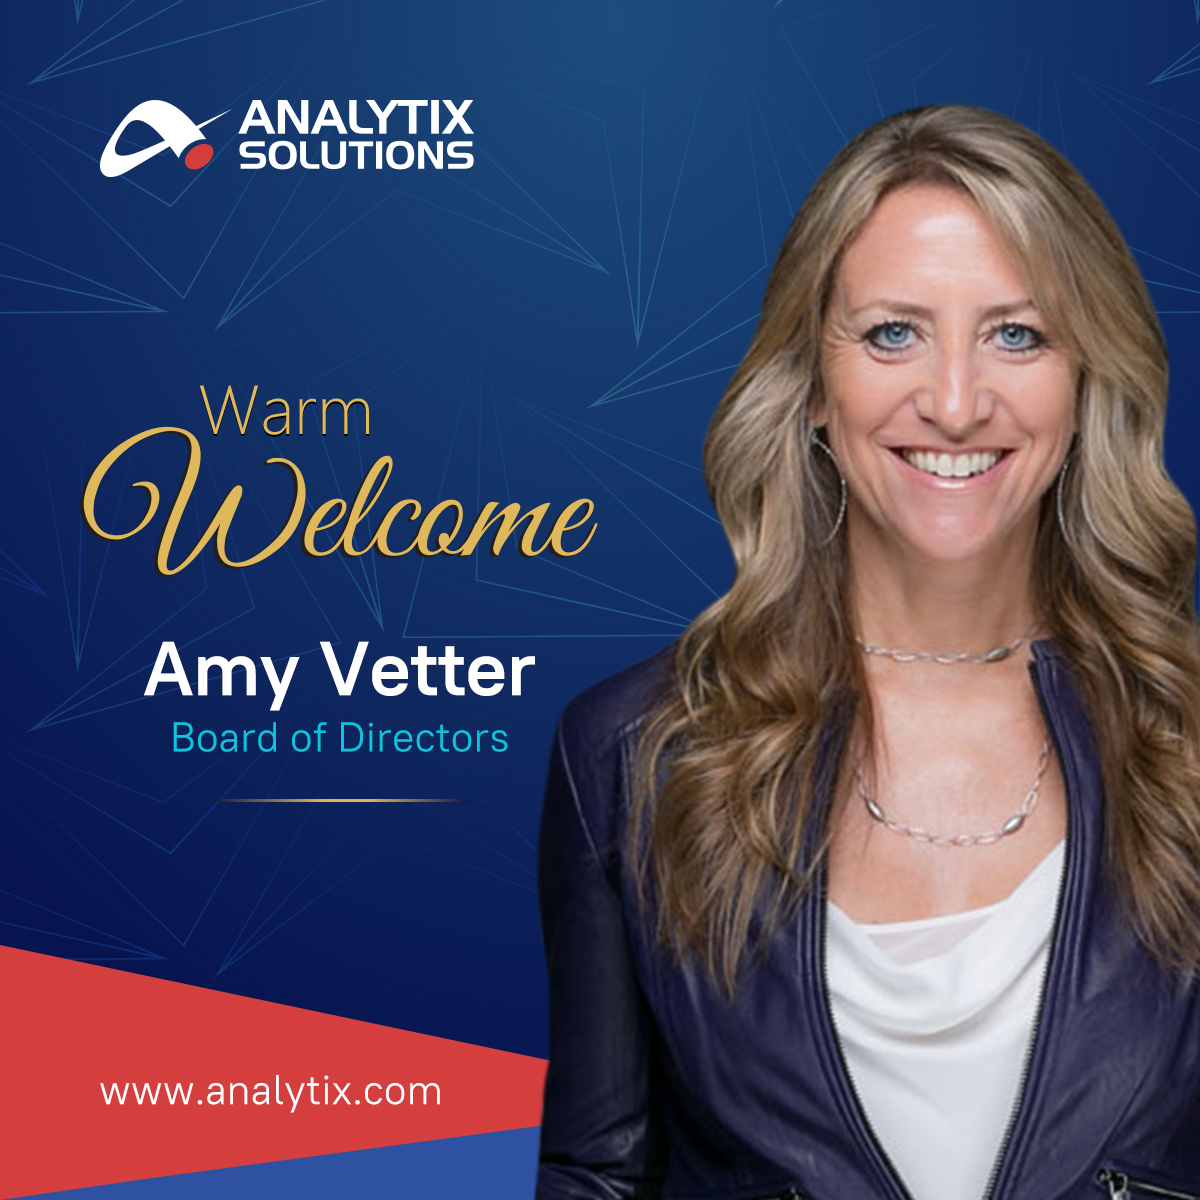 🚀 Exciting Analytix News! 🚀

We're thrilled to announce that Amy Vetter has joined the Analytix Board of Directors.

Welcome to the Analytix family Amy!

#AnalytixSolutions #BoardofDirectors #LimitlessPossibilities #Finance #AccountingFirms #Bookeeping #Fintech #Worklifebalance